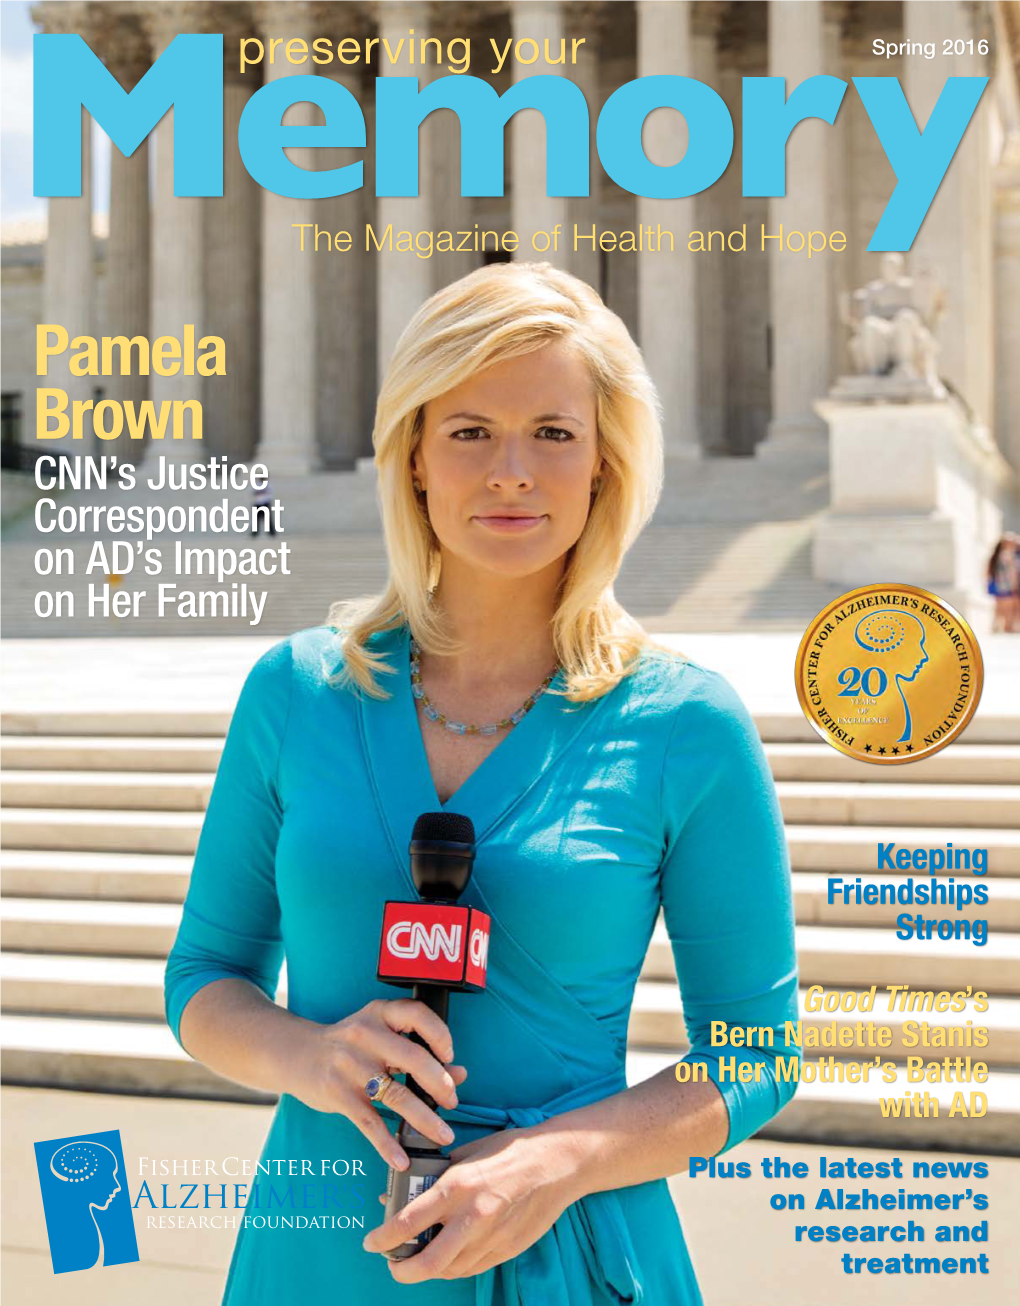 Pamela Brown CNN’S Justice Correspondent on AD’S Impact on Her Family